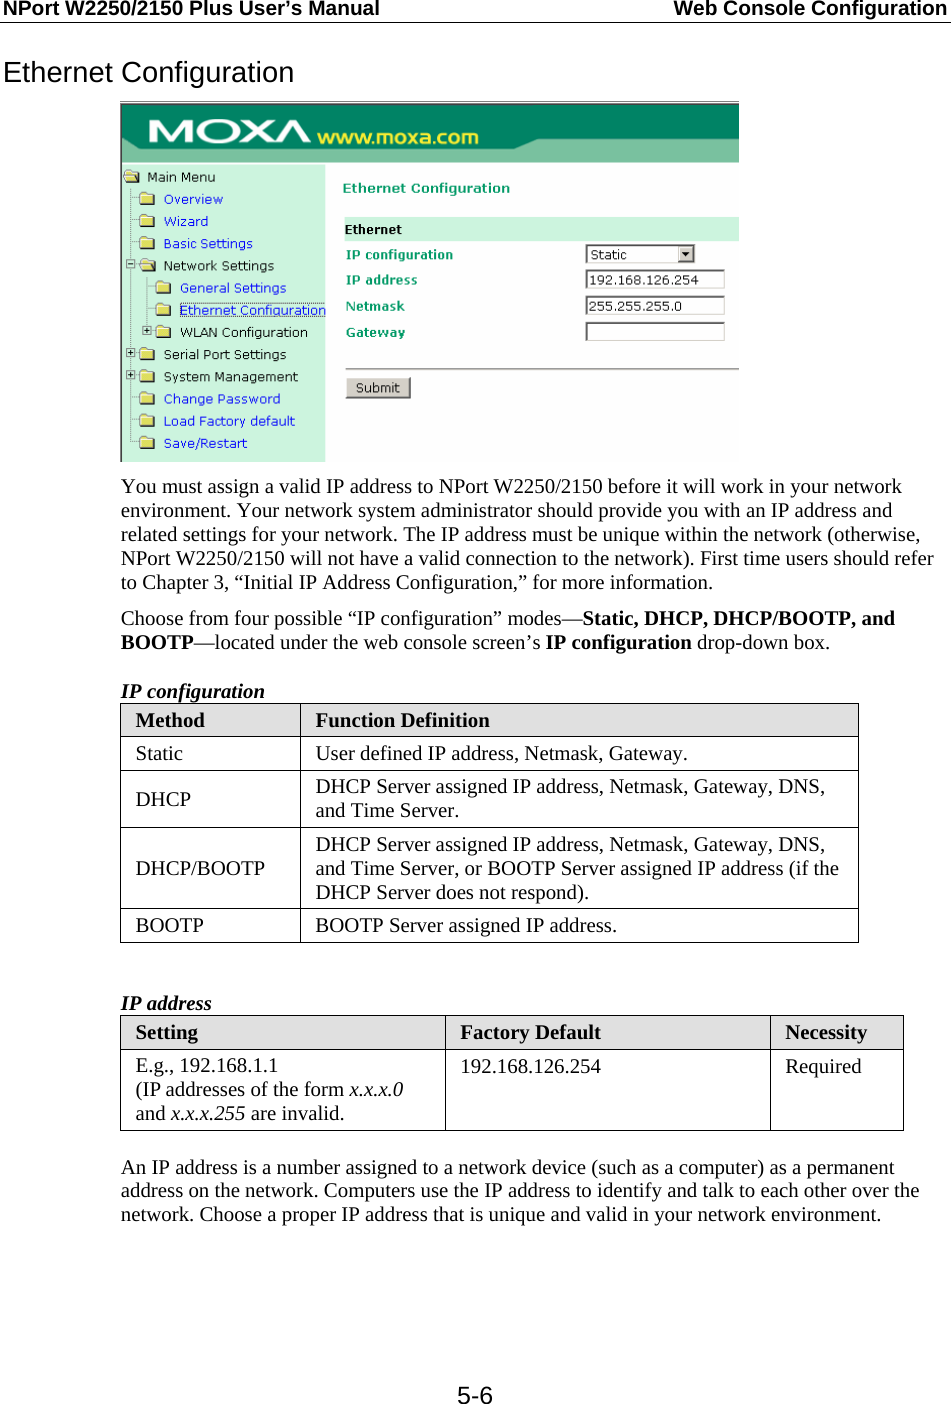 NPort W2250/2150 Plus User’s Manual  Web Console Configuration  5-6Ethernet Configuration  You must assign a valid IP address to NPort W2250/2150 before it will work in your network environment. Your network system administrator should provide you with an IP address and related settings for your network. The IP address must be unique within the network (otherwise, NPort W2250/2150 will not have a valid connection to the network). First time users should refer to Chapter 3, “Initial IP Address Configuration,” for more information. Choose from four possible “IP configuration” modes—Static, DHCP, DHCP/BOOTP, and BOOTP—located under the web console screen’s IP configuration drop-down box. IP configuration Method  Function Definition Static  User defined IP address, Netmask, Gateway. DHCP  DHCP Server assigned IP address, Netmask, Gateway, DNS, and Time Server. DHCP/BOOTP  DHCP Server assigned IP address, Netmask, Gateway, DNS, and Time Server, or BOOTP Server assigned IP address (if the DHCP Server does not respond). BOOTP  BOOTP Server assigned IP address.  IP address Setting  Factory Default  Necessity E.g., 192.168.1.1 (IP addresses of the form x.x.x.0 and x.x.x.255 are invalid. 192.168.126.254 Required  An IP address is a number assigned to a network device (such as a computer) as a permanent address on the network. Computers use the IP address to identify and talk to each other over the network. Choose a proper IP address that is unique and valid in your network environment.   